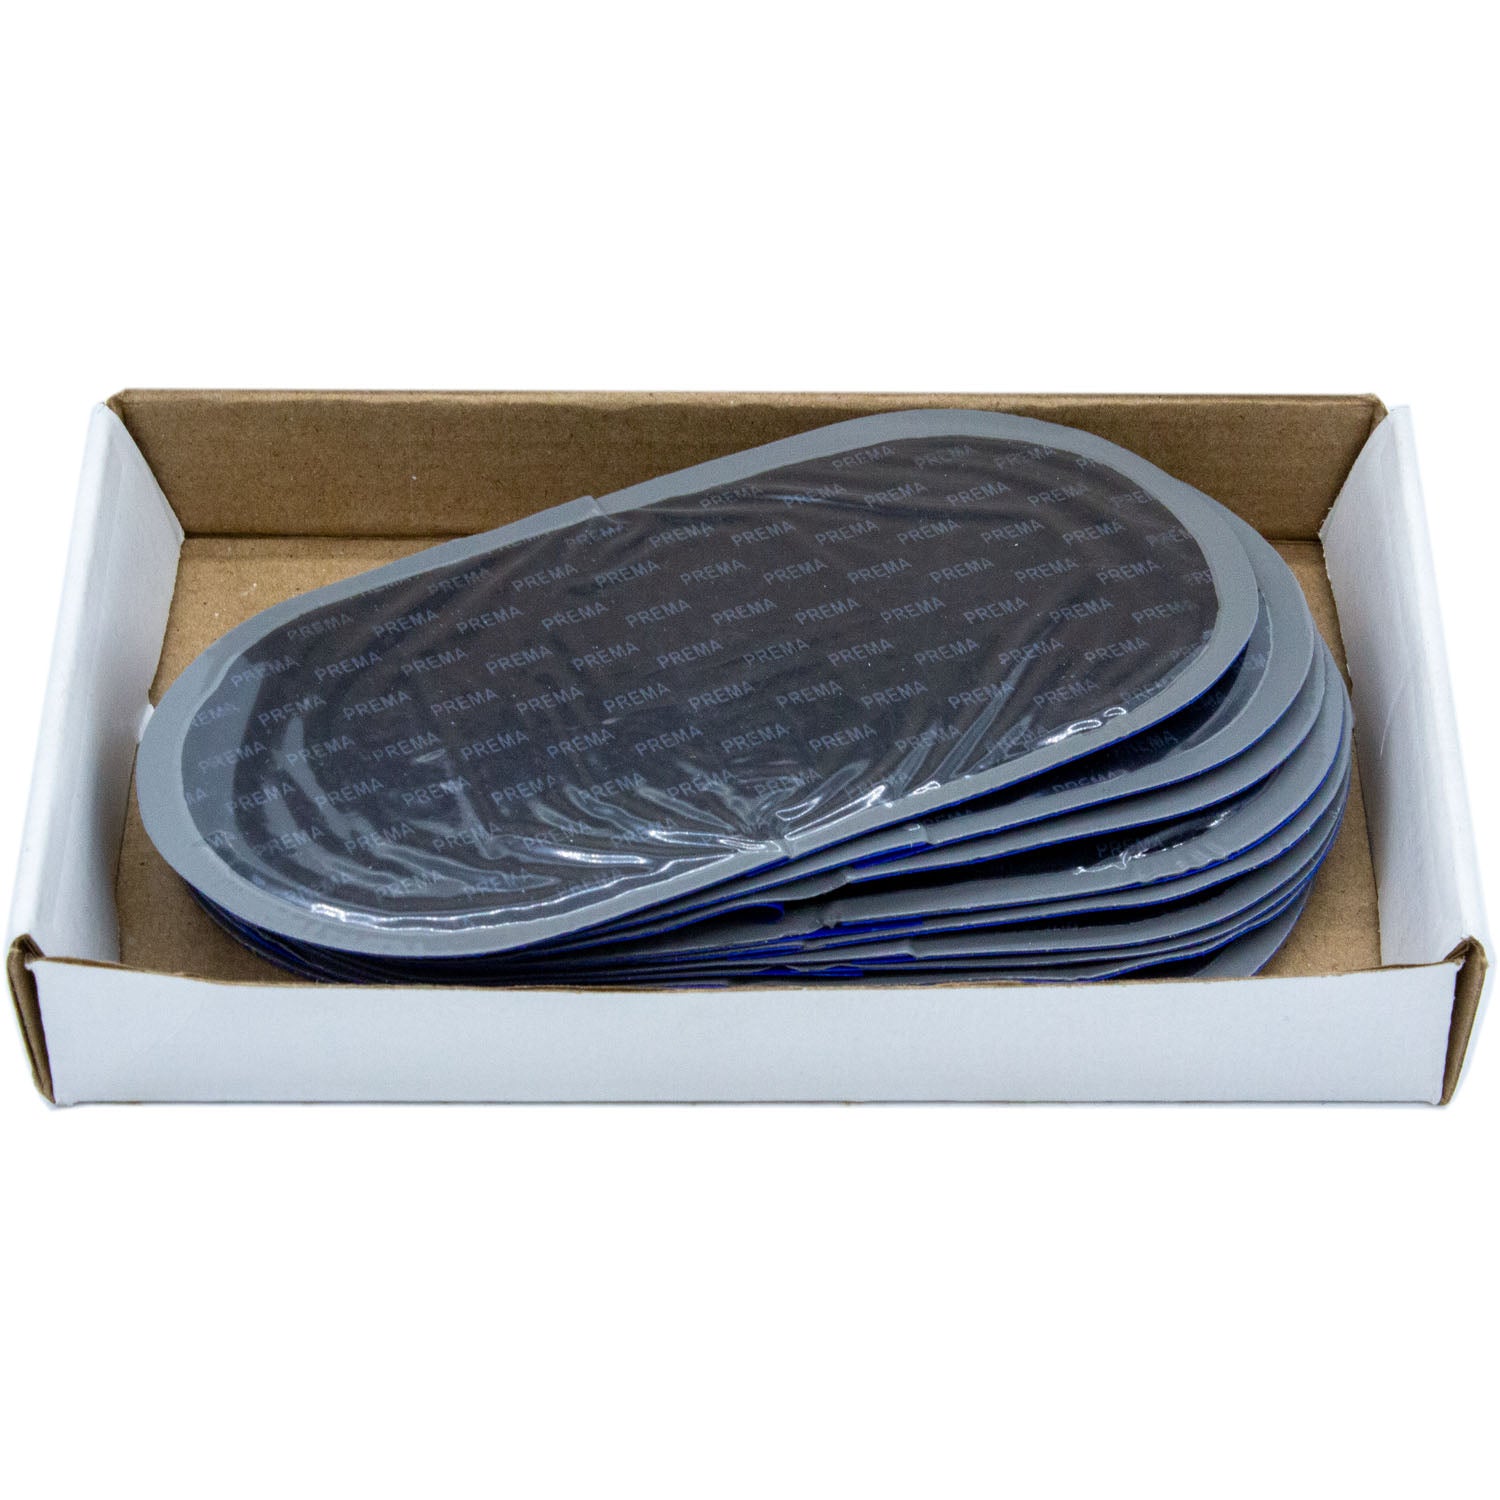 Prema PT-9 Large Oval Tube Patch 6" X 3" Box of 10